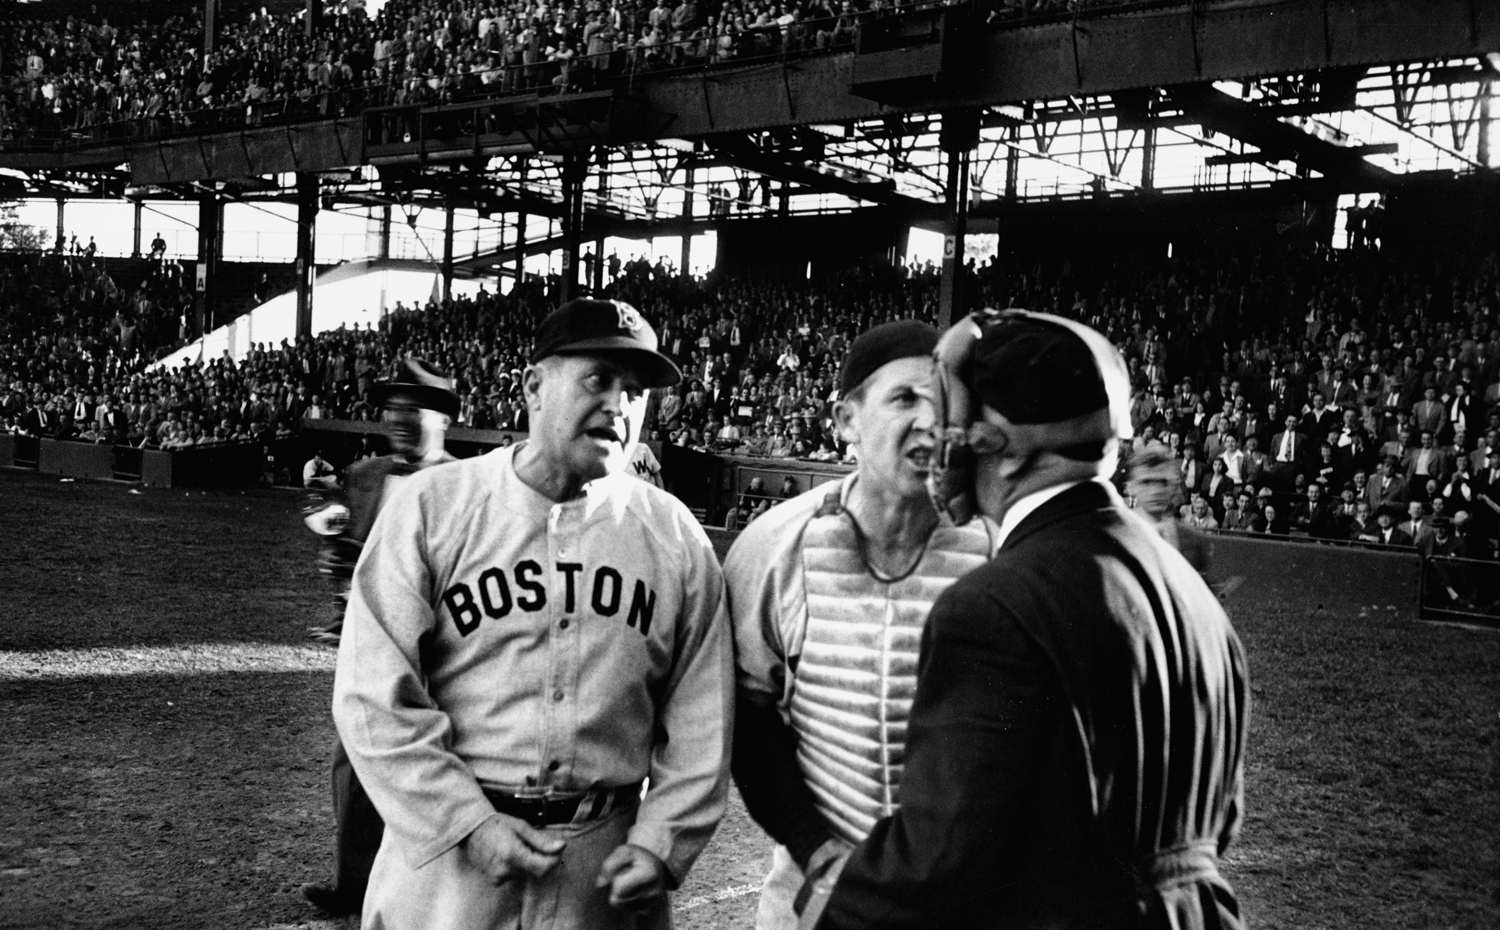 After umpire William Grieve issues a walk to a Washington pinch-hitter, Red Sox manager Joe McCarthy and catcher Birdie Tebbetts express their doubts about Grieve's judgment, 1949.